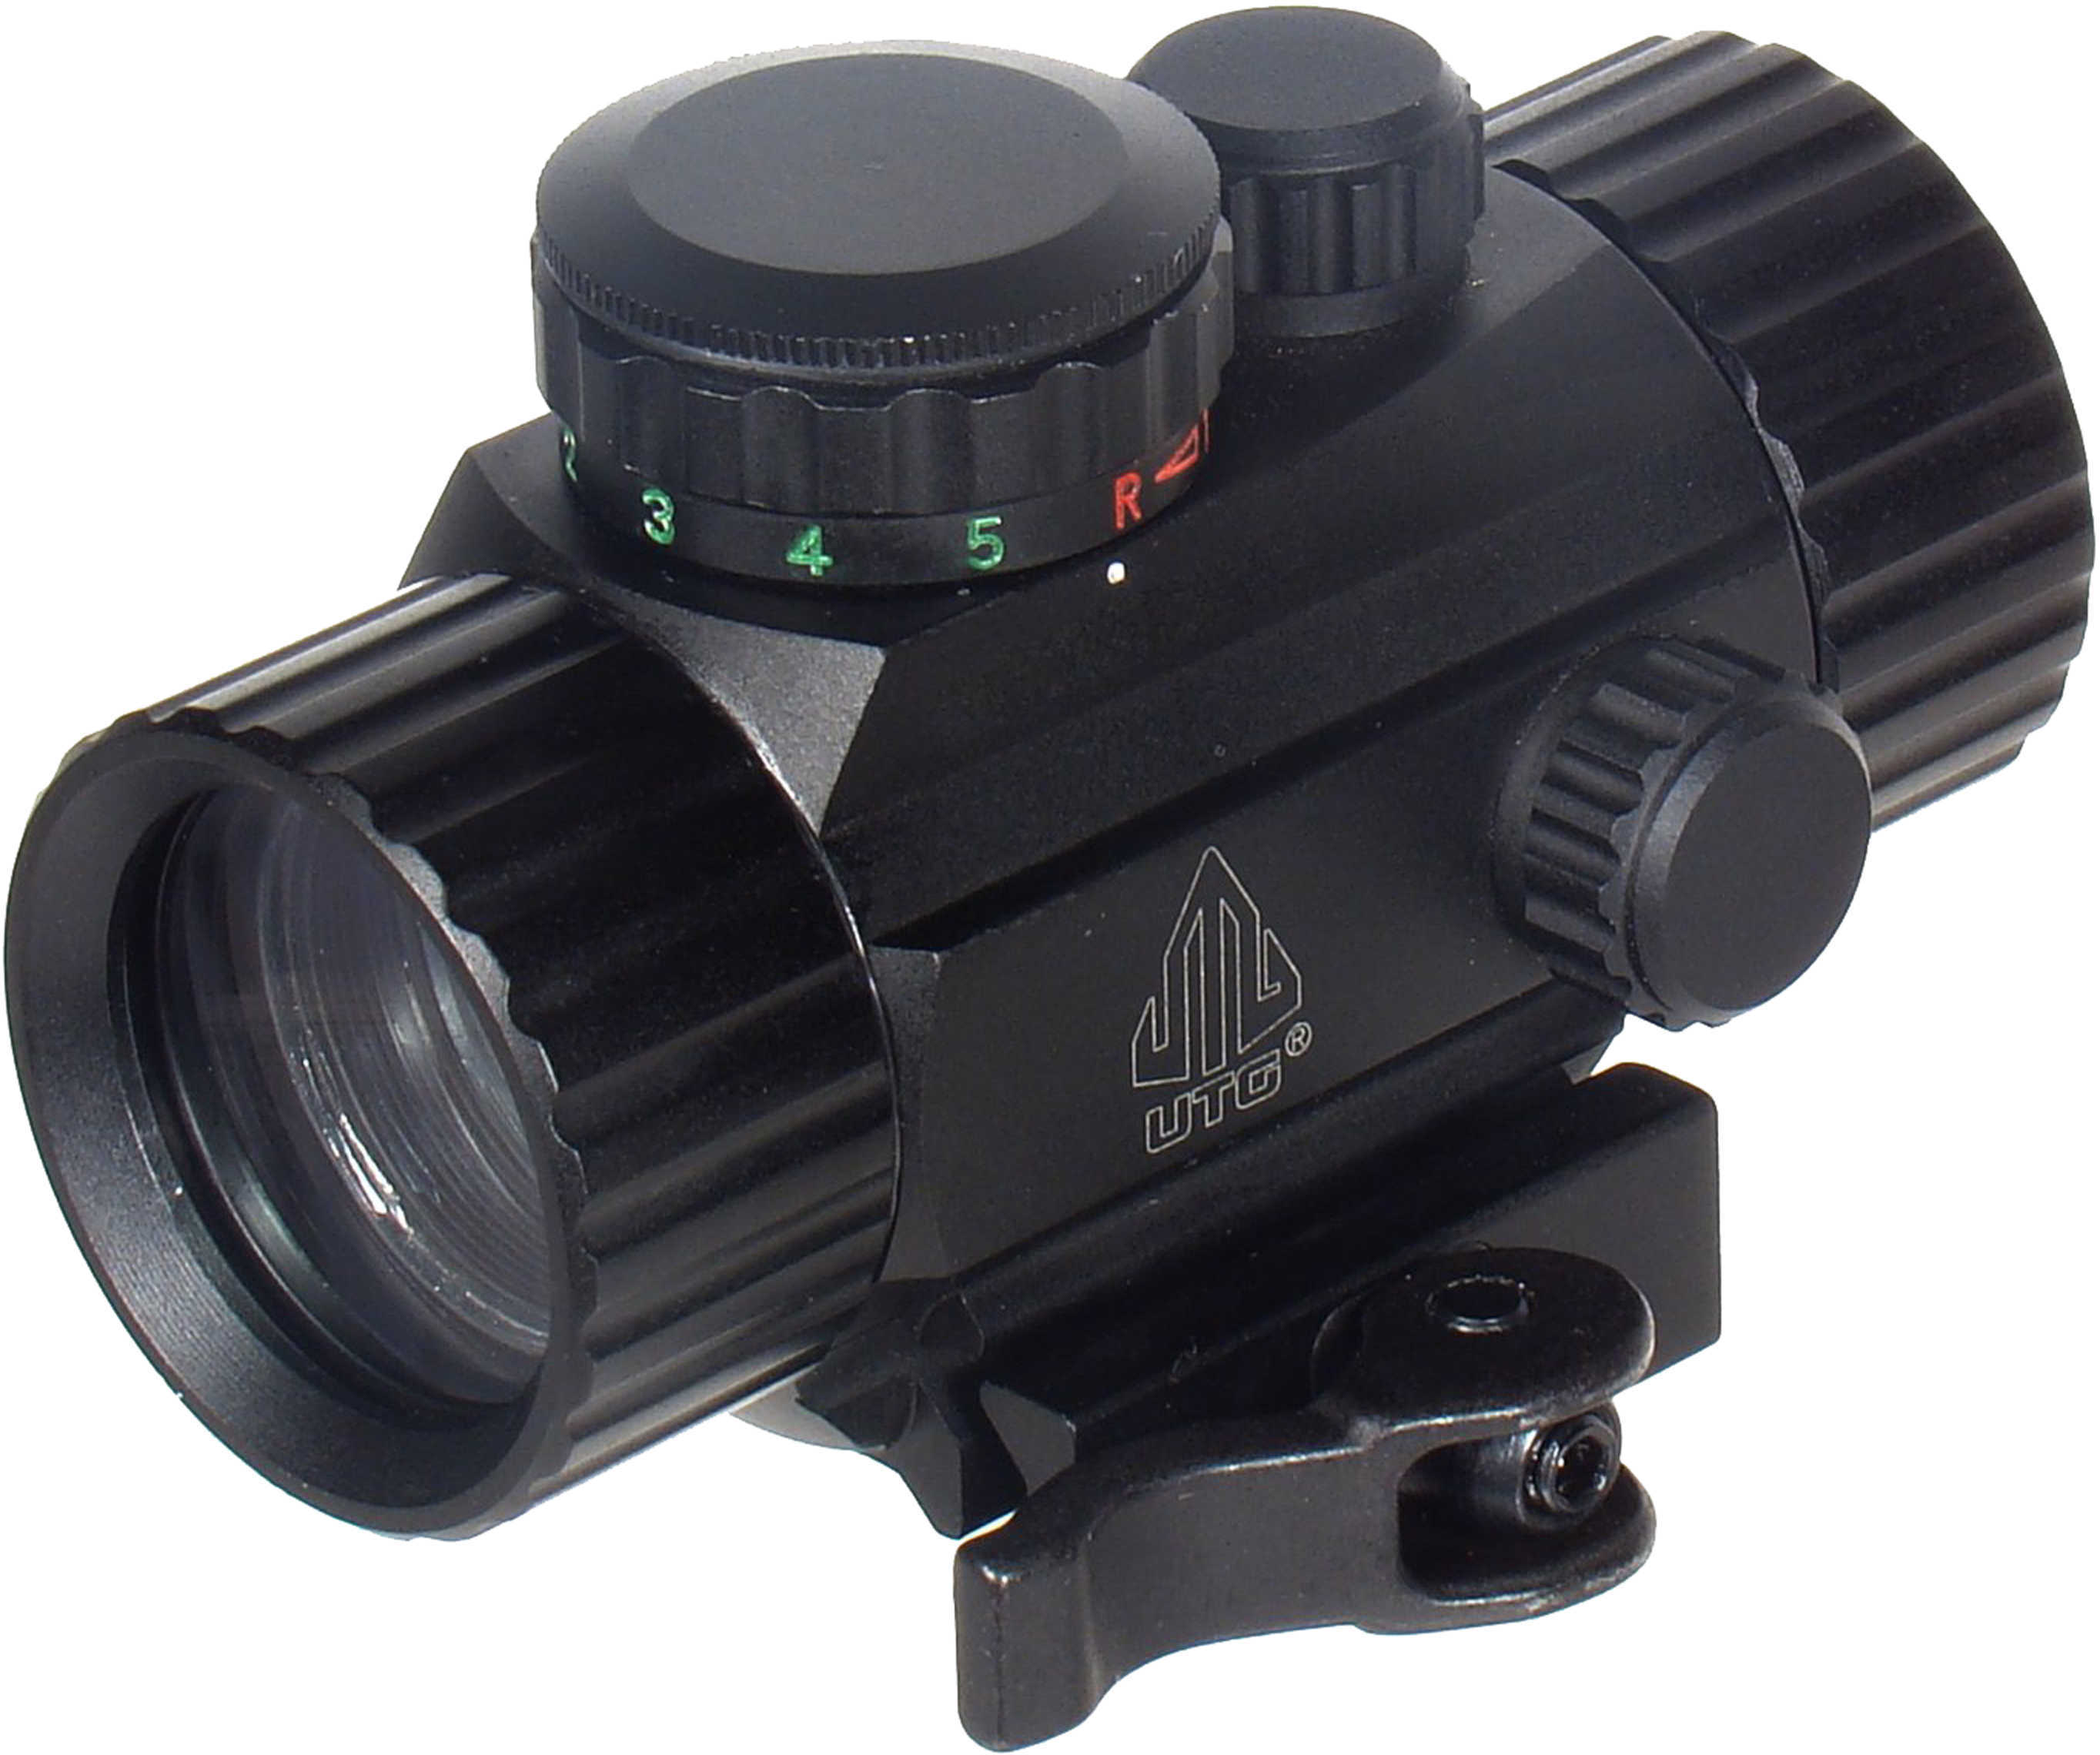 Leapers Inc. - UTG Instant Target Aiming Sight 3.8" 38mm Black Finish Red/Green Circle Dot w/Integral QD Mount SCP-RG40C